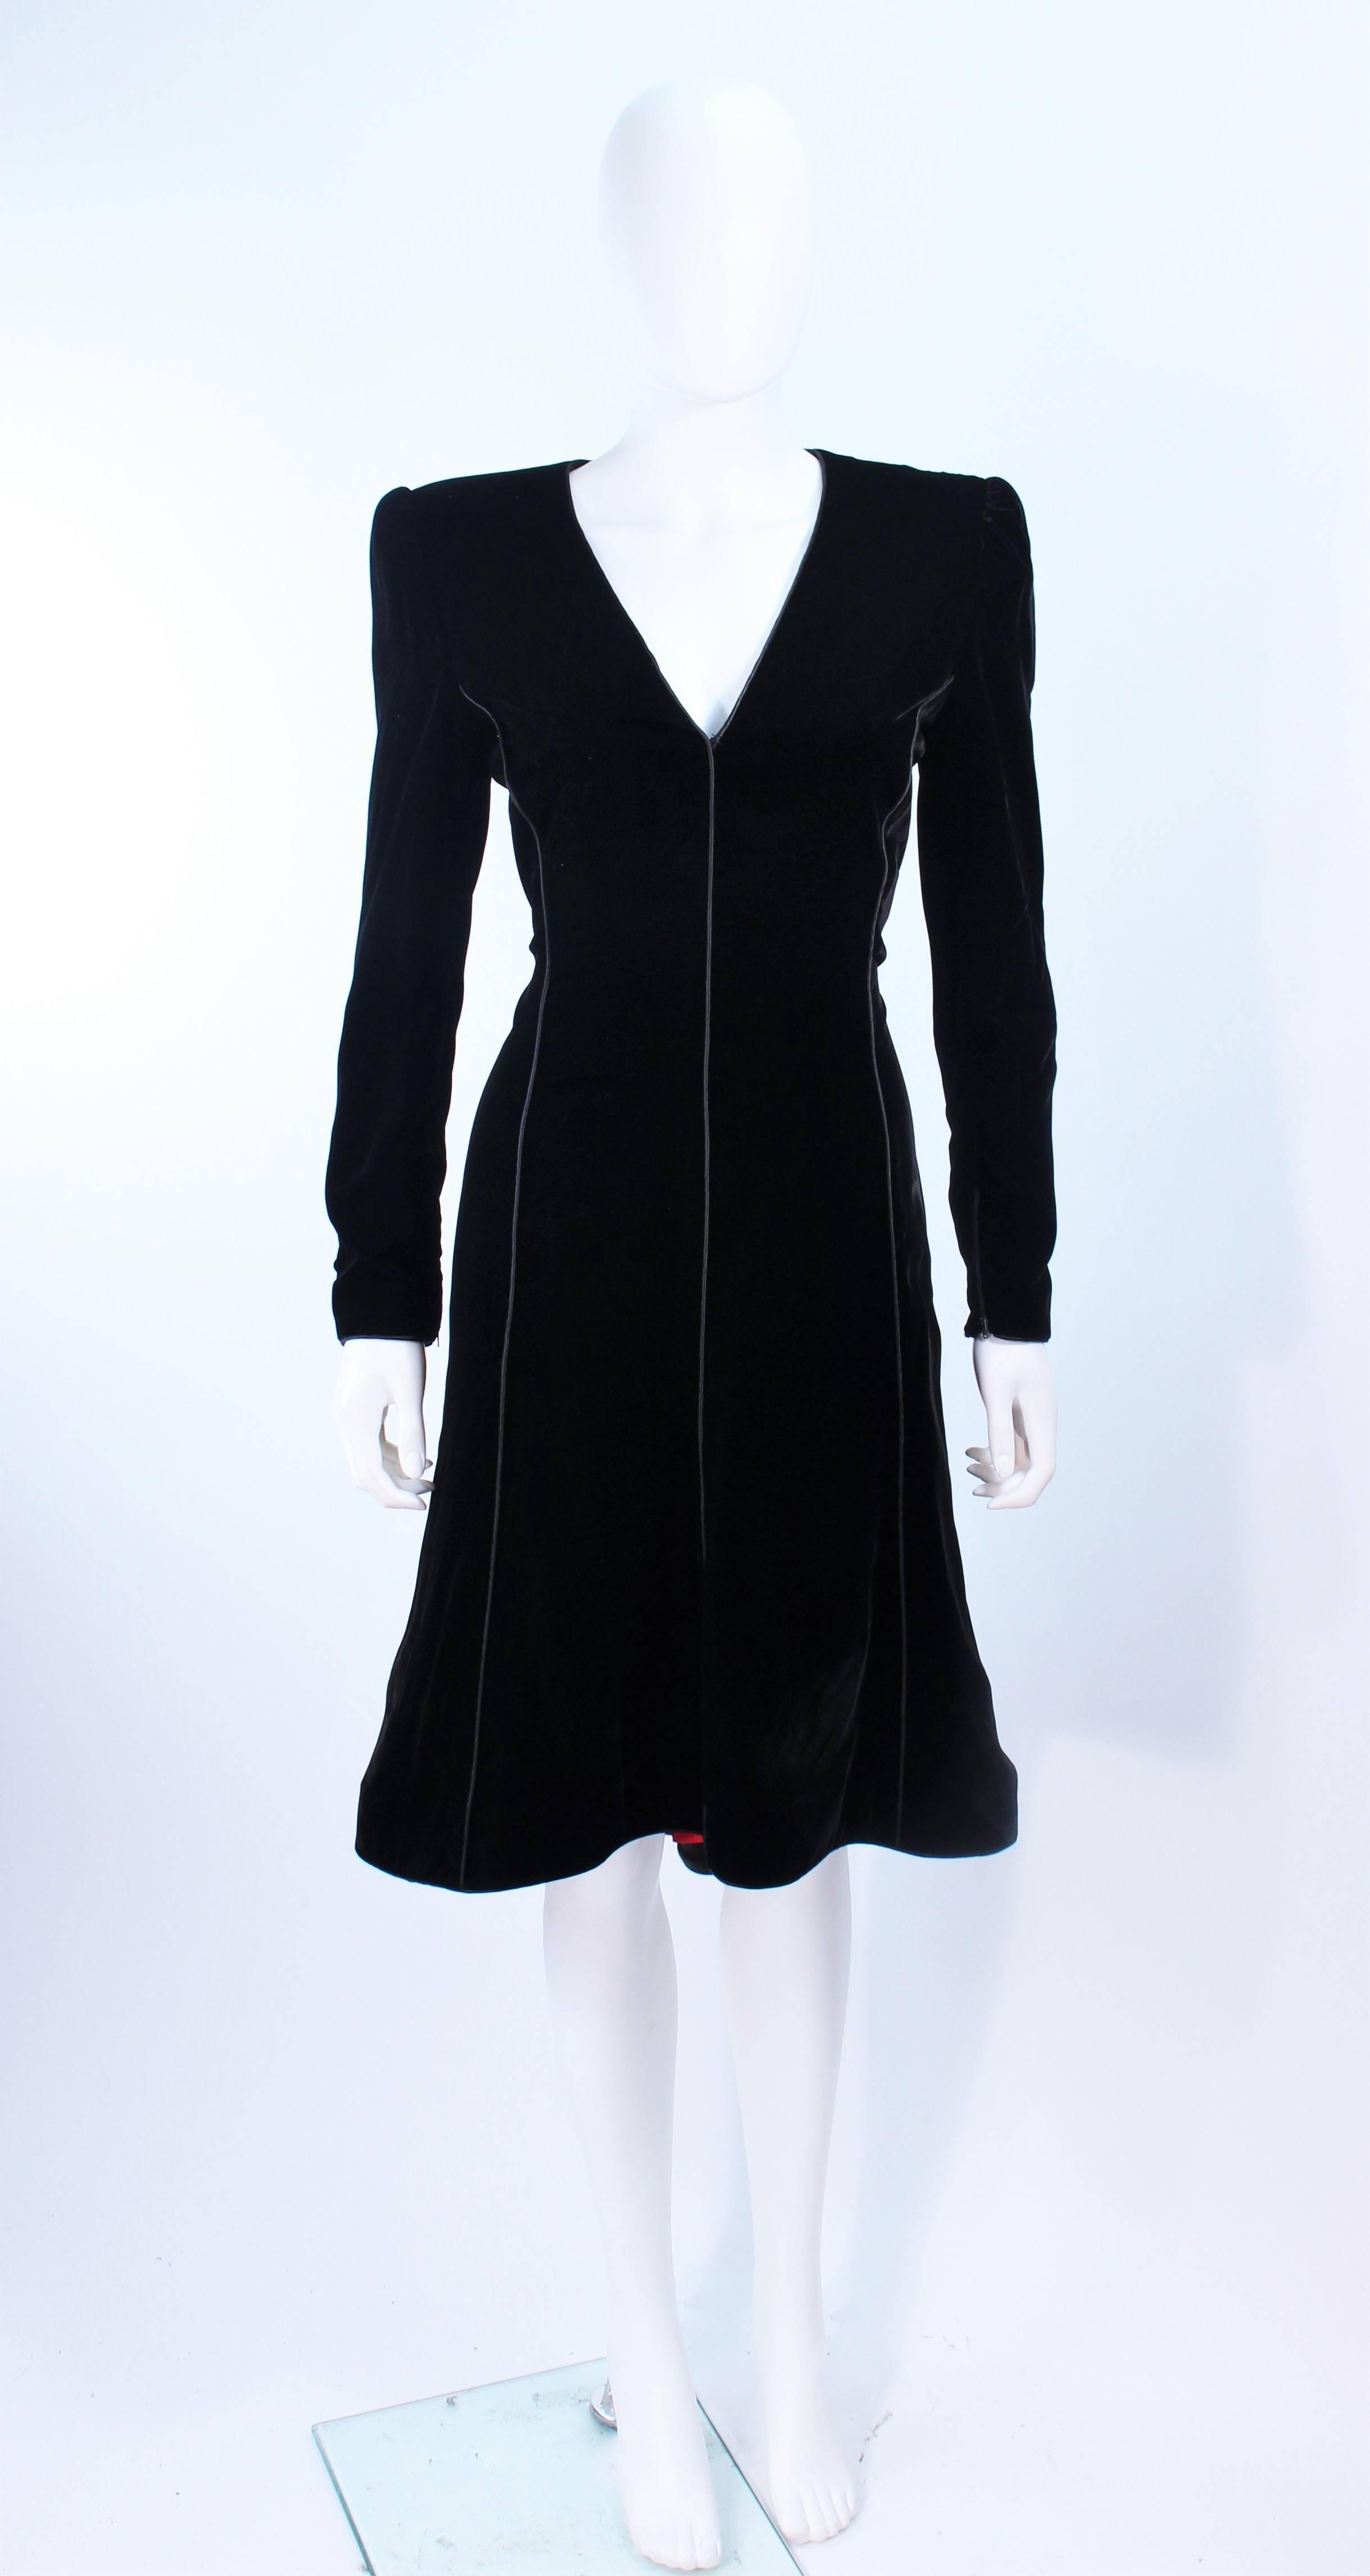 This Valentino cocktail dress is composed of black velvet and features an interior contrasting pleated detail in red. There is a center back zipper closure. In excellent vintage condition.

**Please cross-reference measurements for personal